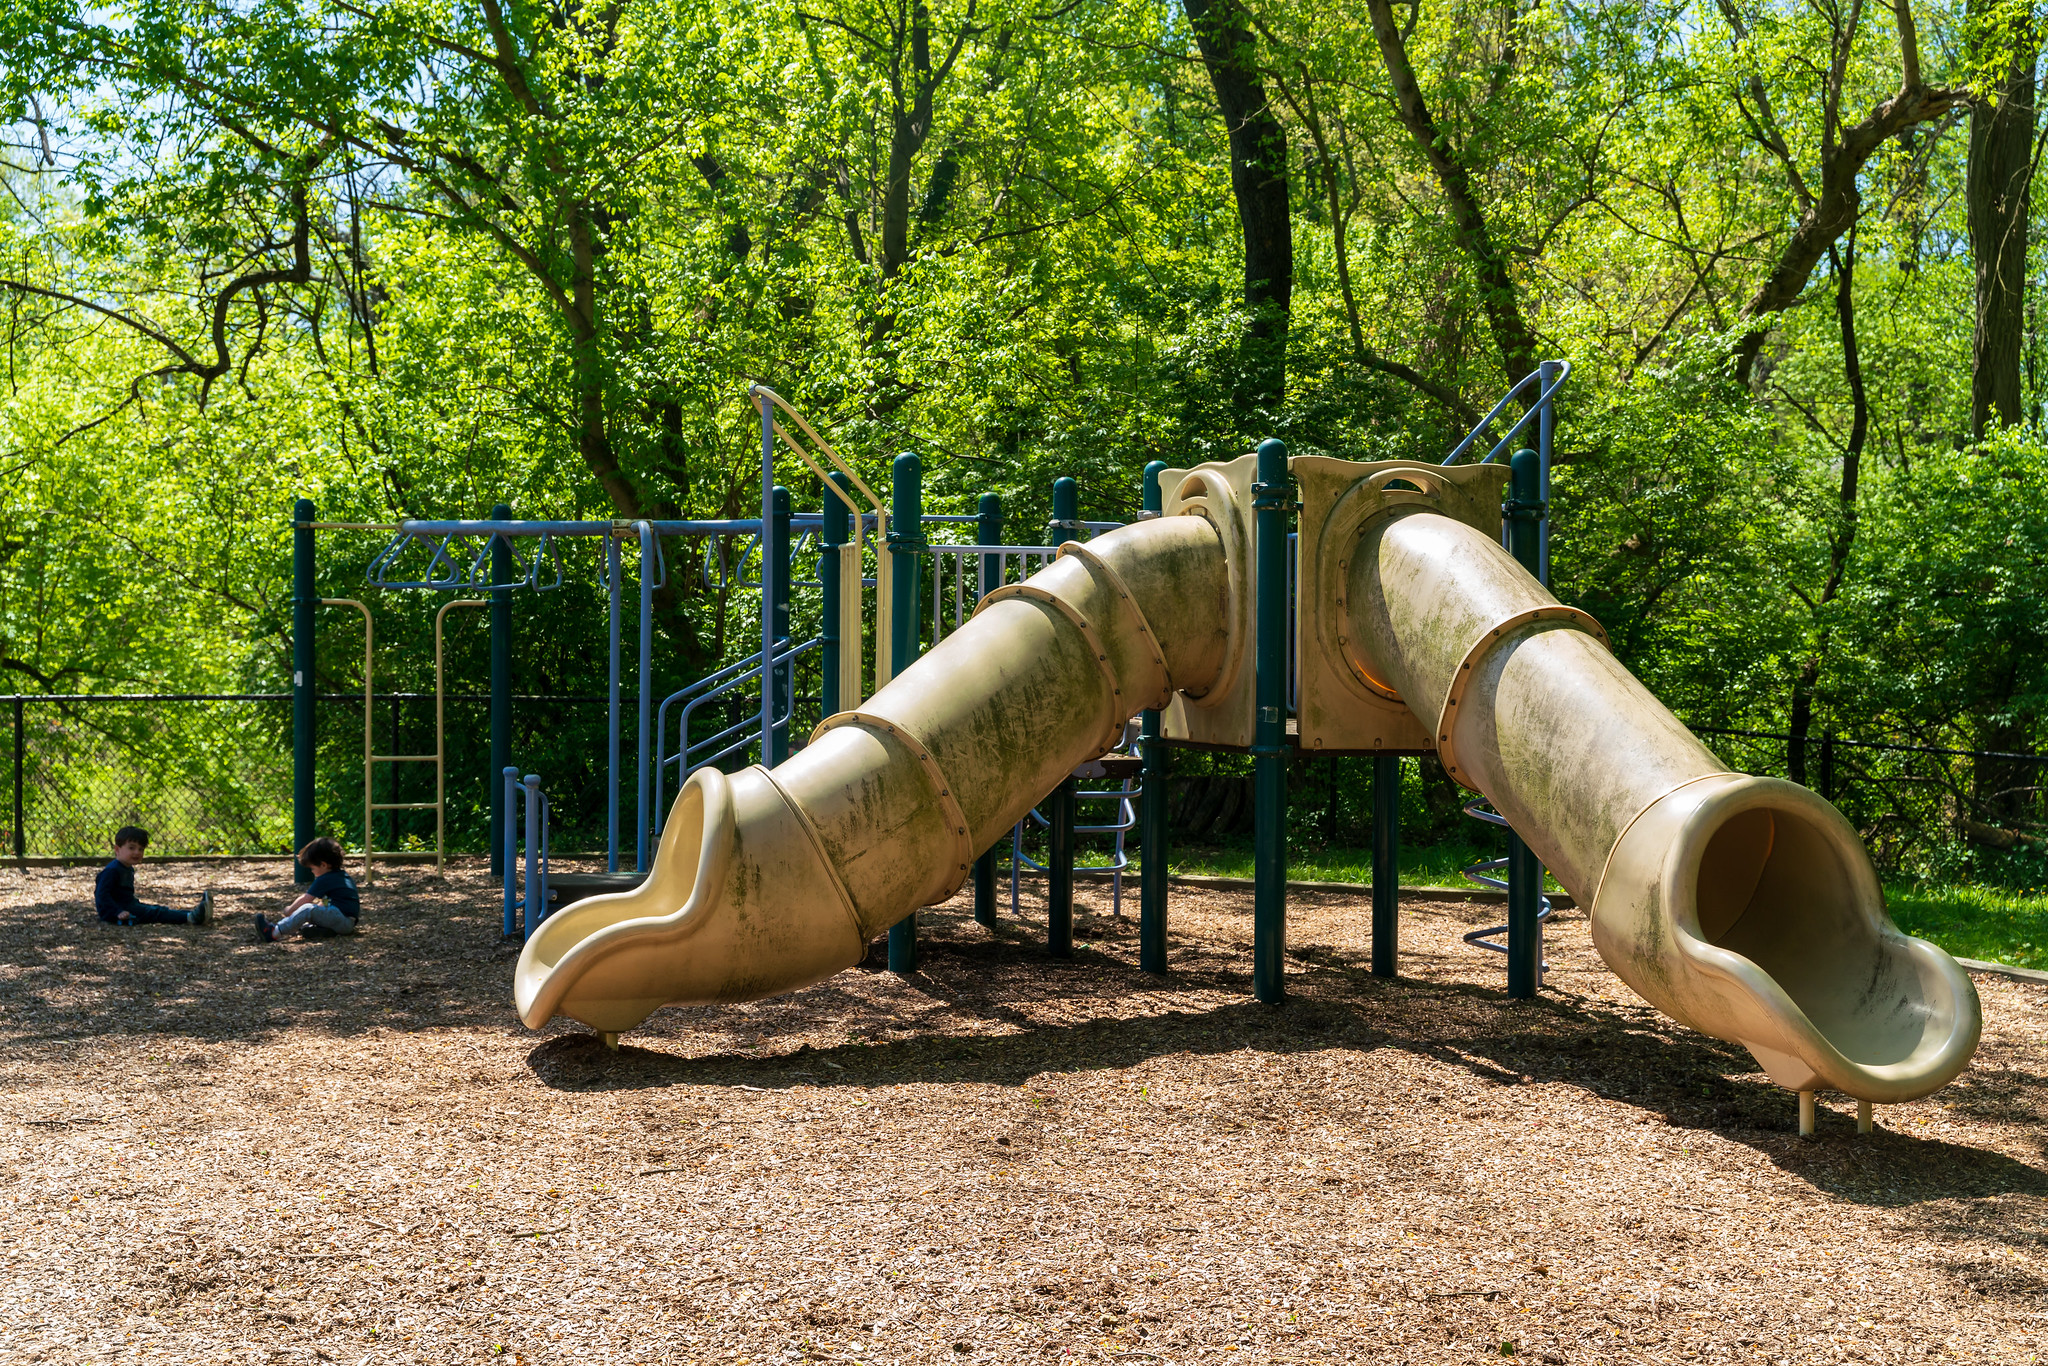 playground with two yellow slides at Ken-Gar Palisades Local Park